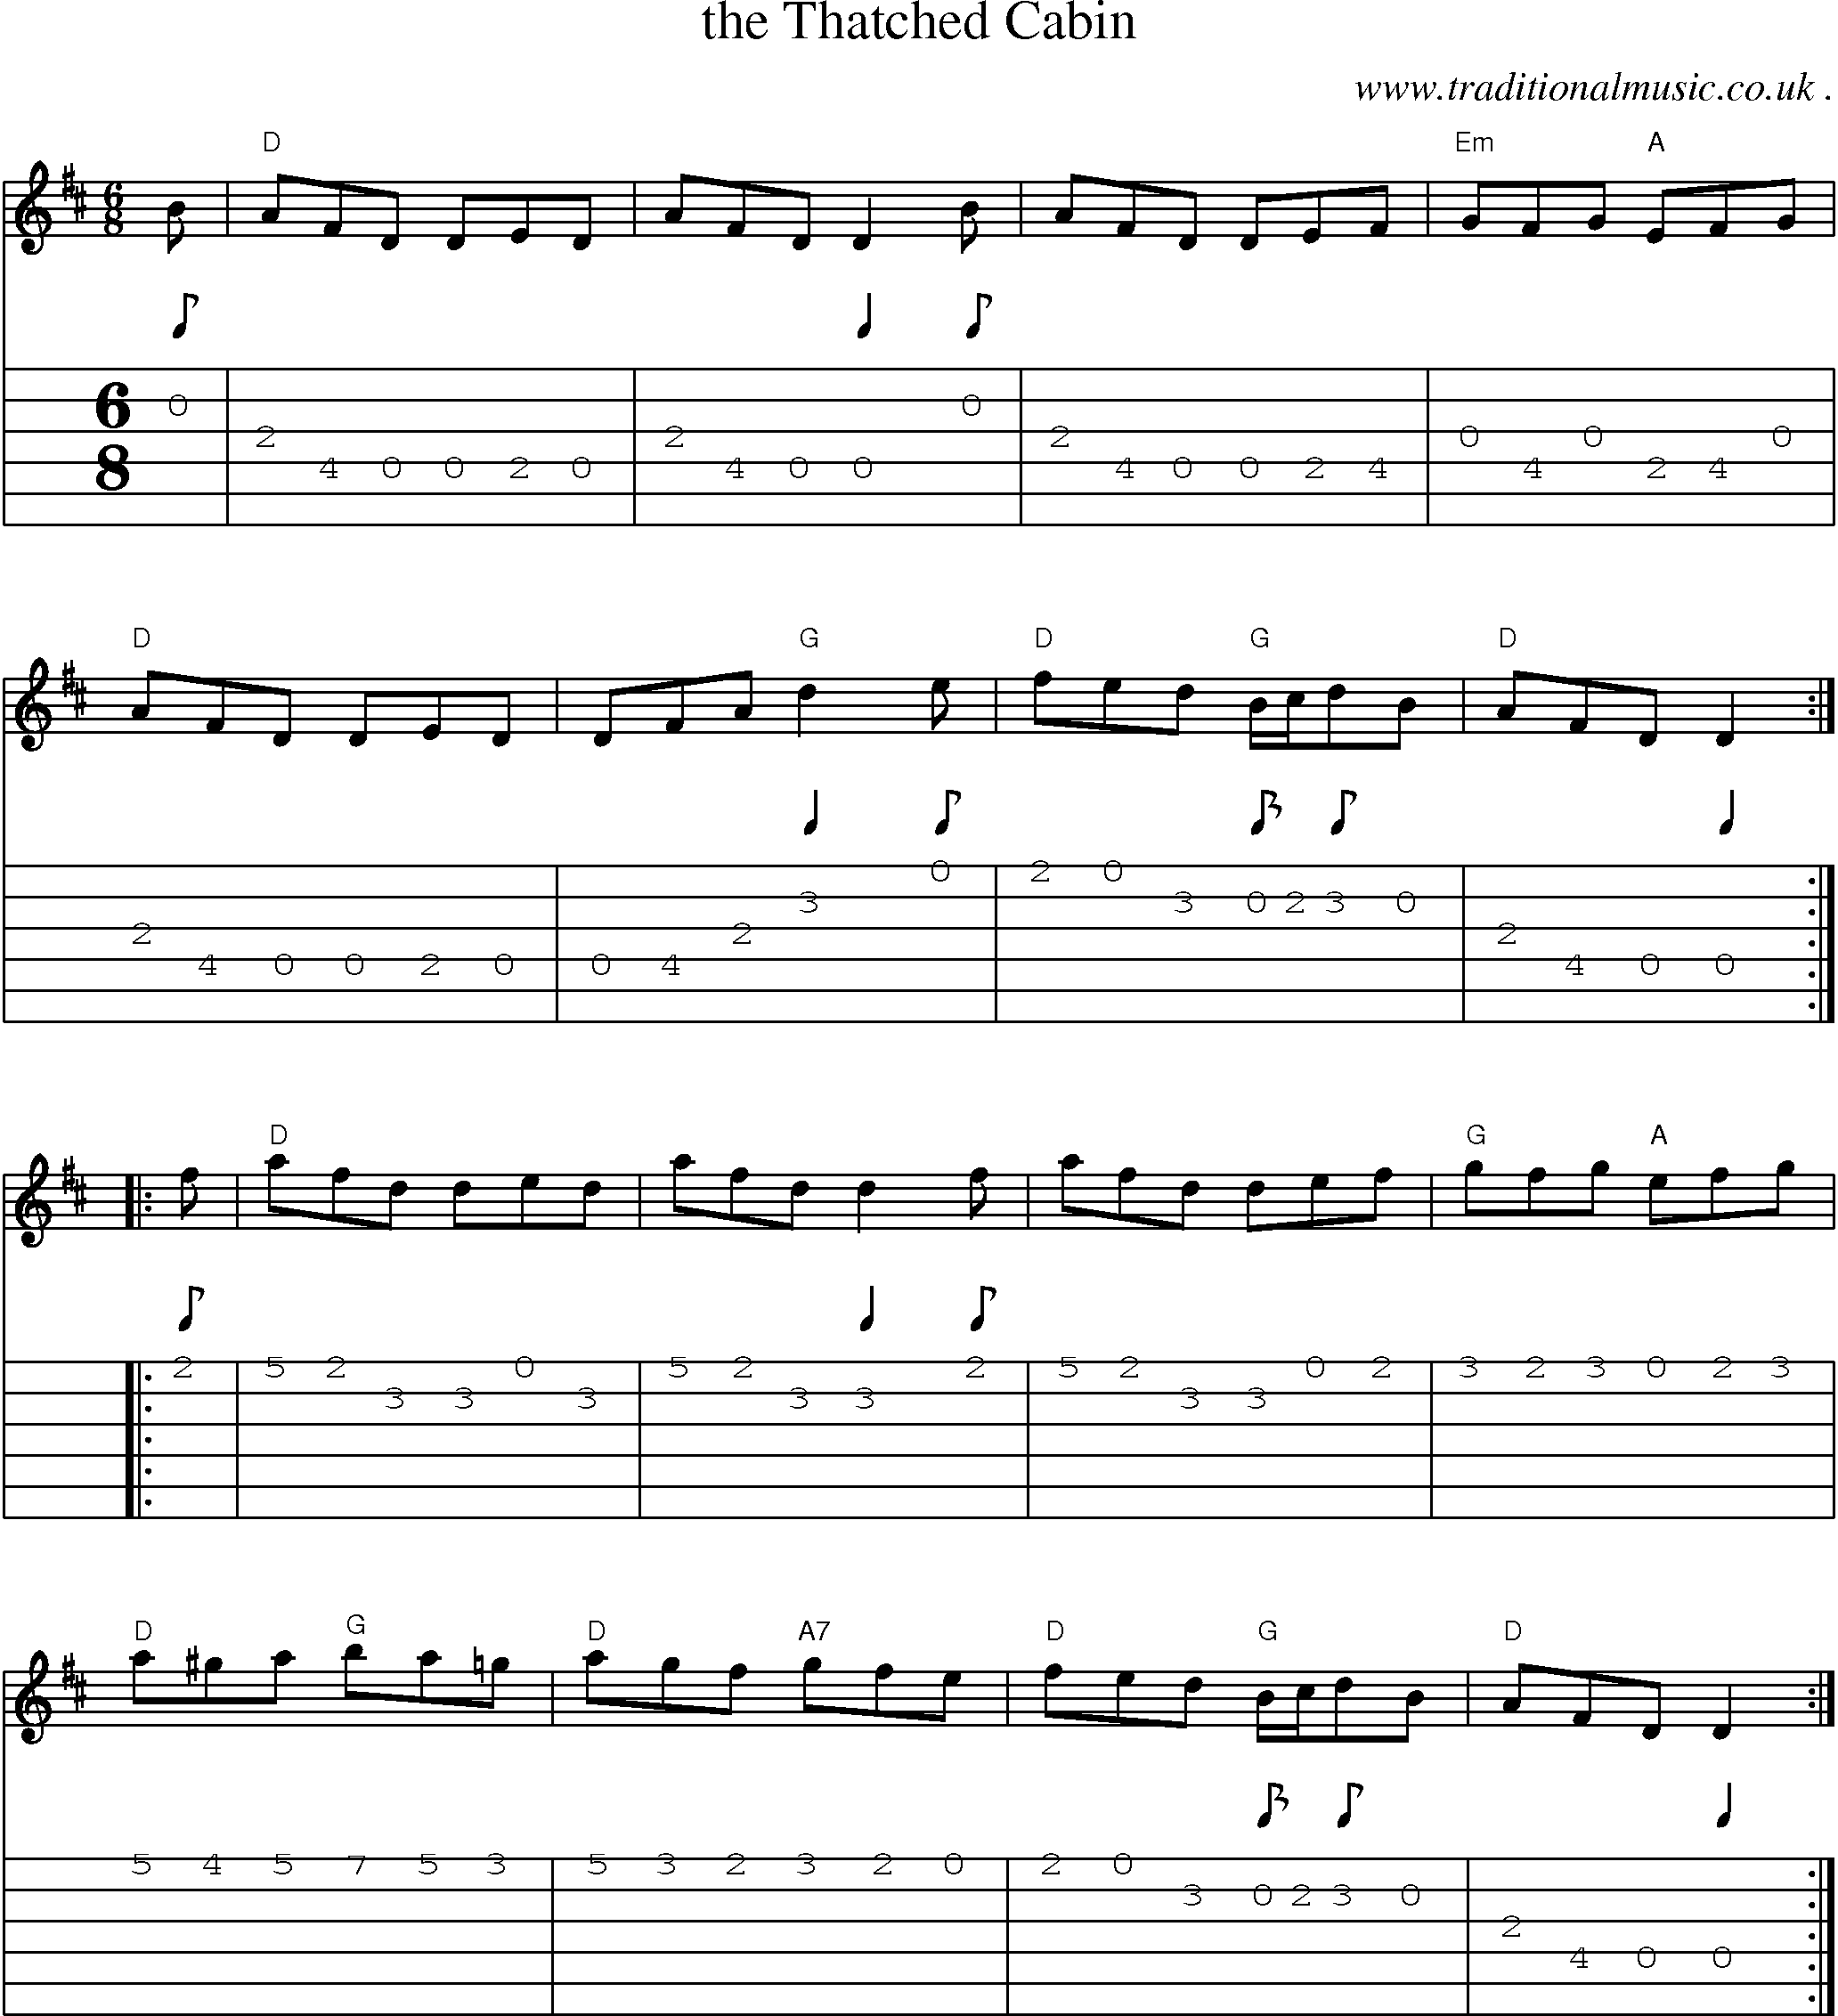 Sheet-music  score, Chords and Guitar Tabs for The Thatched Cabin